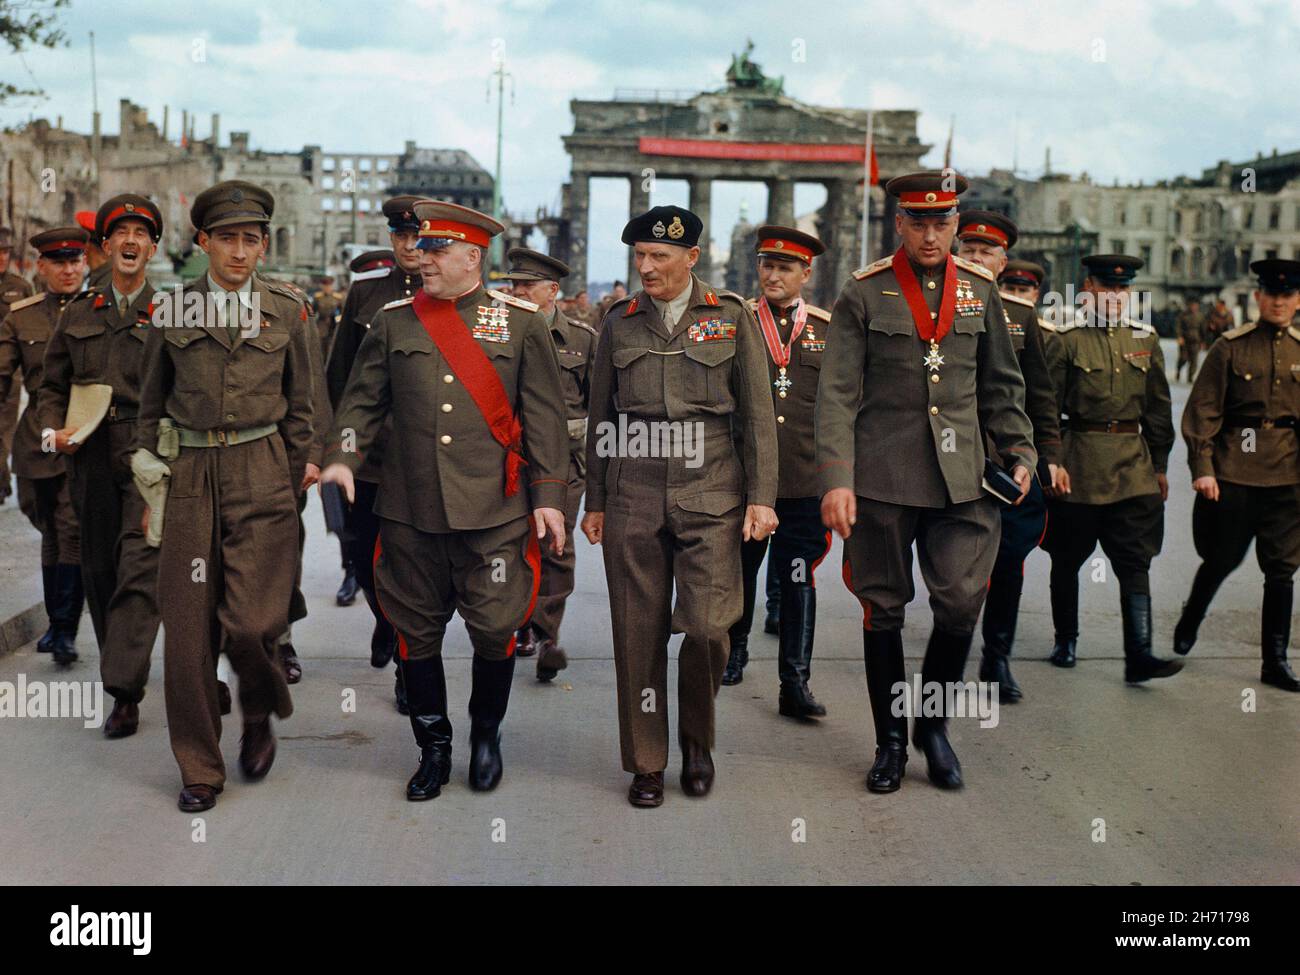 BERLIN, GERMANY - 12 July 1945 - Field Marshall Montgomery decorates Russian generals at the Brandenburg Gate in Berlin, Germany. The Deputy Supreme C Stock Photo